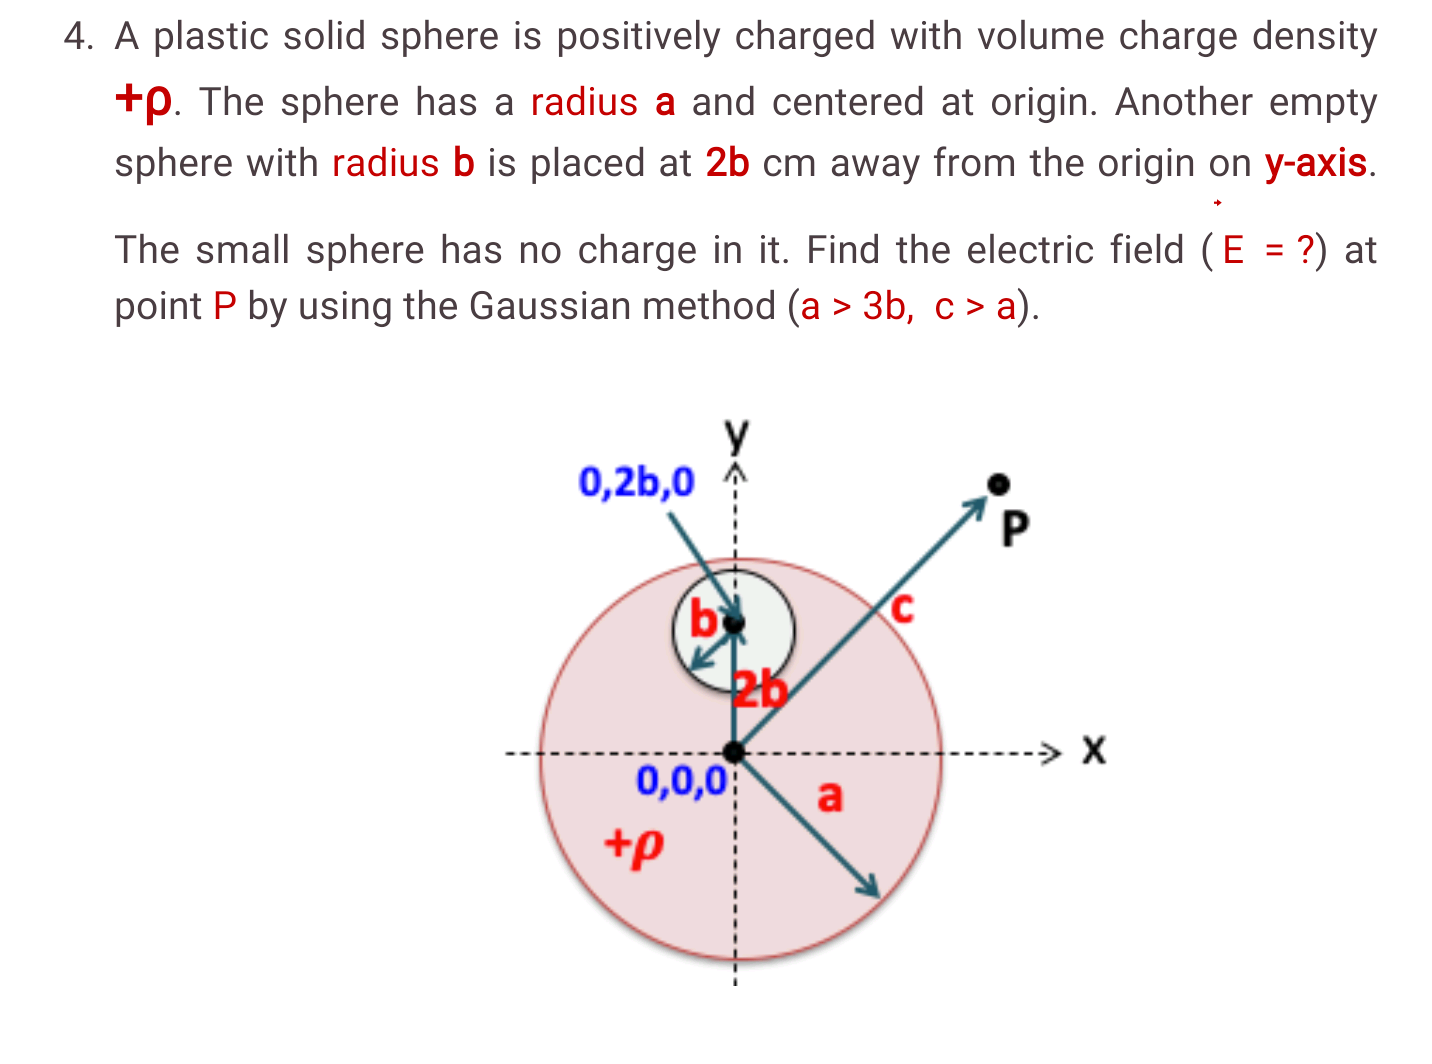 A plastic solid sphere is positively charged with volume charge density
+p. The sphere has a radius a and centered at origin. Another empty
sphere with radius b is placed at 2b cm away from the origin on y-axis.
The small sphere has no charge in it. Find the electric field (E = ?) at
point P by using the Gaussian method (a > 3b, c > a).
0,2b,0 A
P
-> X
0,0,0
a
+p
